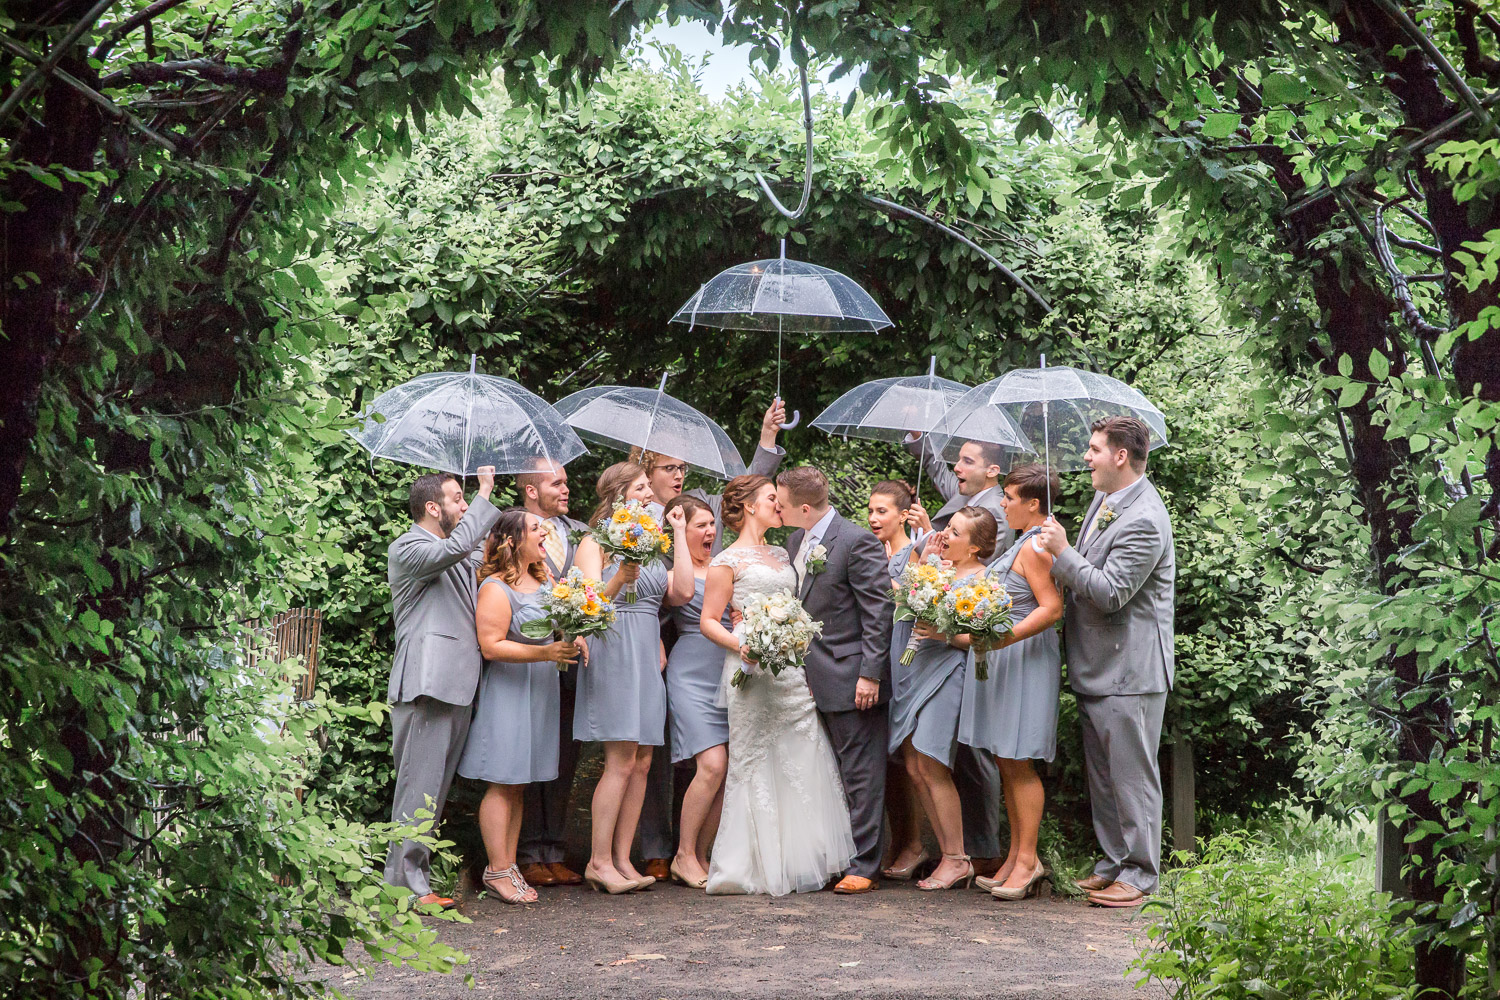 Bridal party cheering for couple on a rainy day